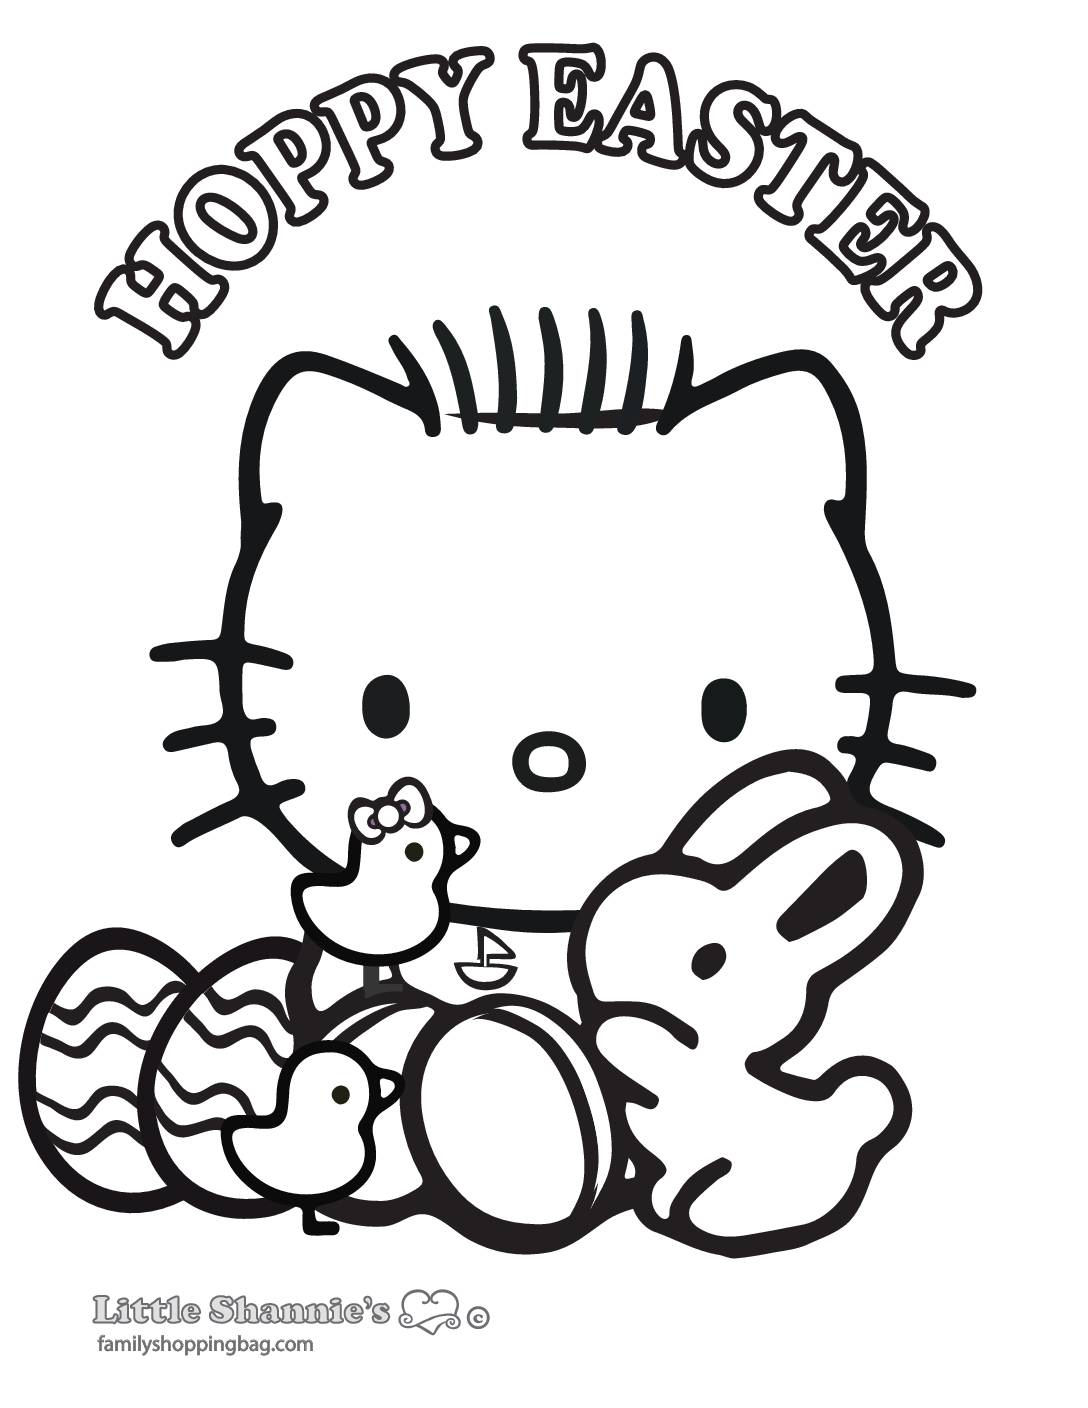 Coloring Page 3 Easter